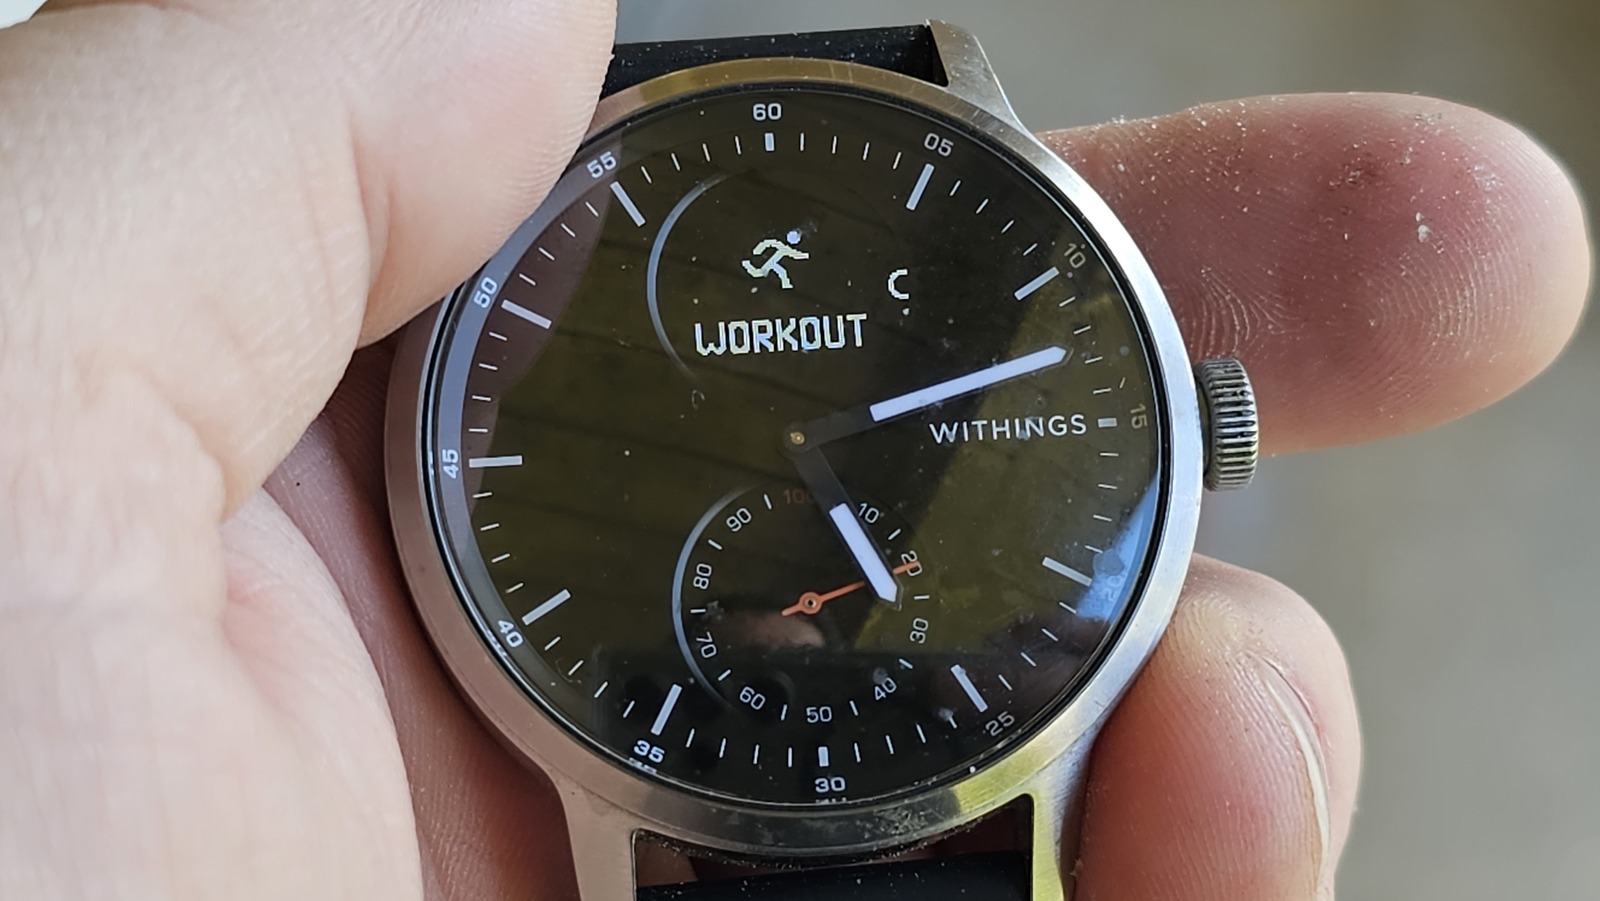 Withings Scanwatch Review Smartwatch Battery Life For Days, But At